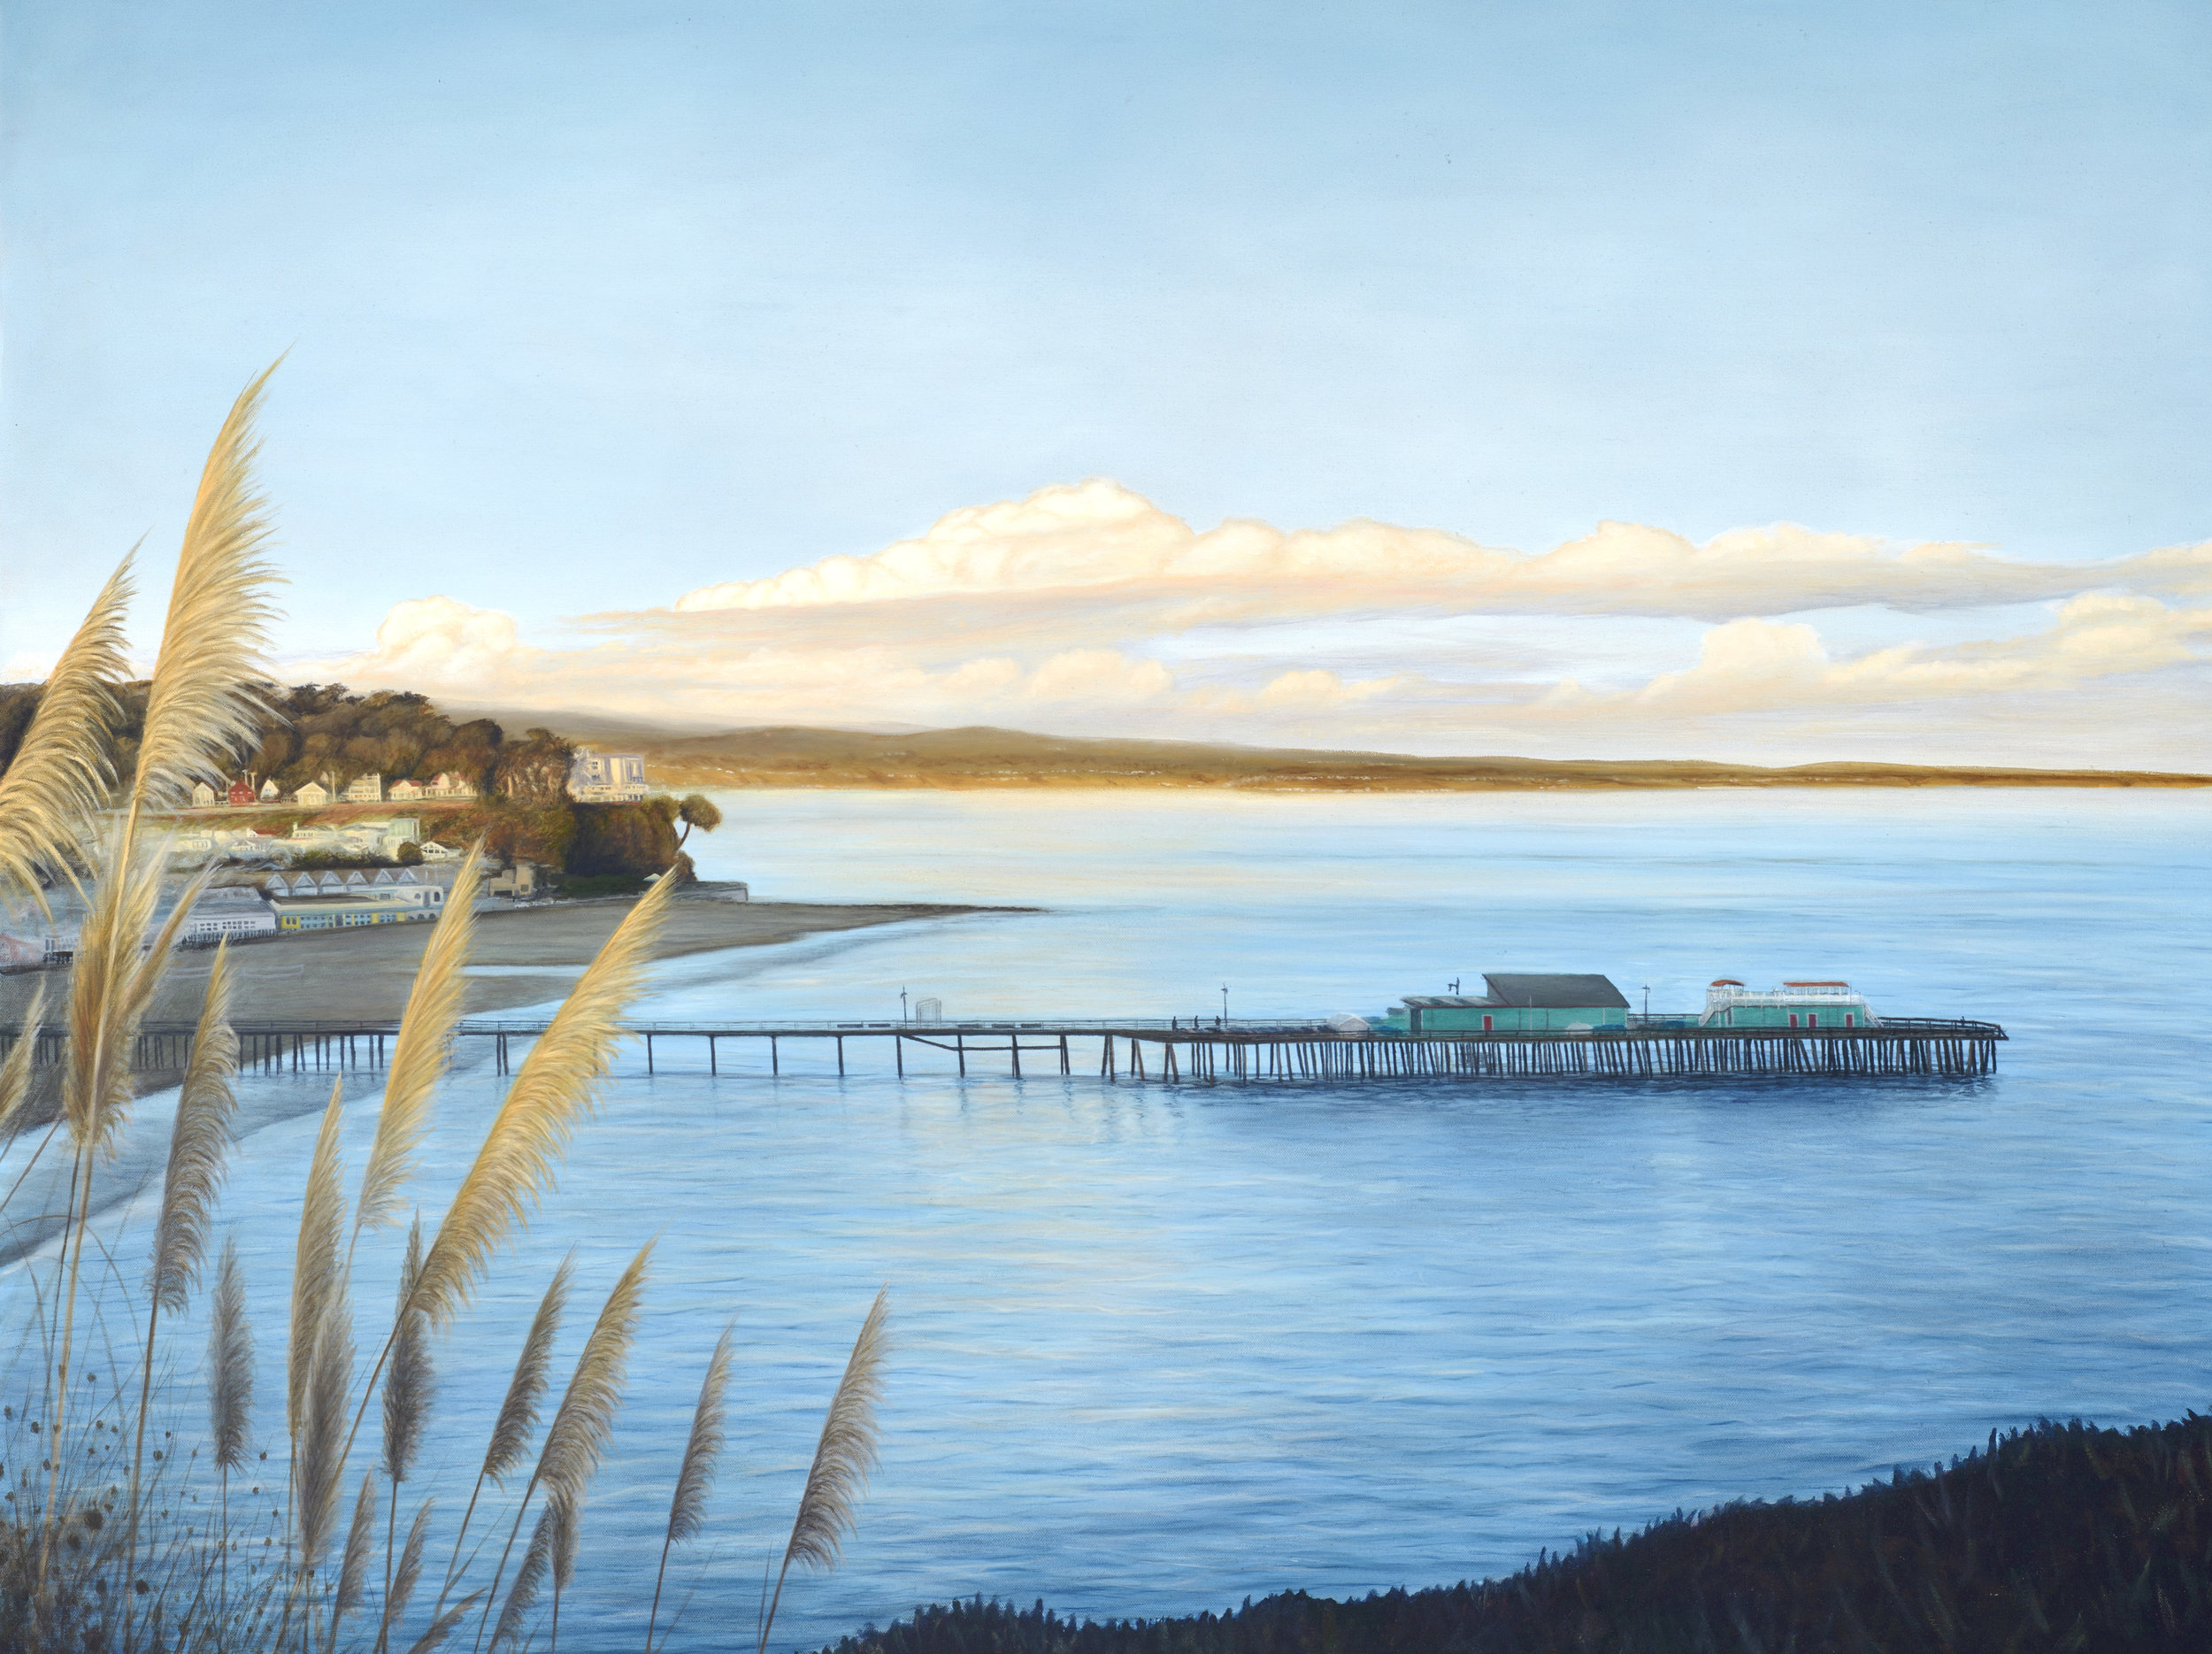  “Capitola”   Oil on Canvas    40"x50"    Original-Sold    Prints Available    